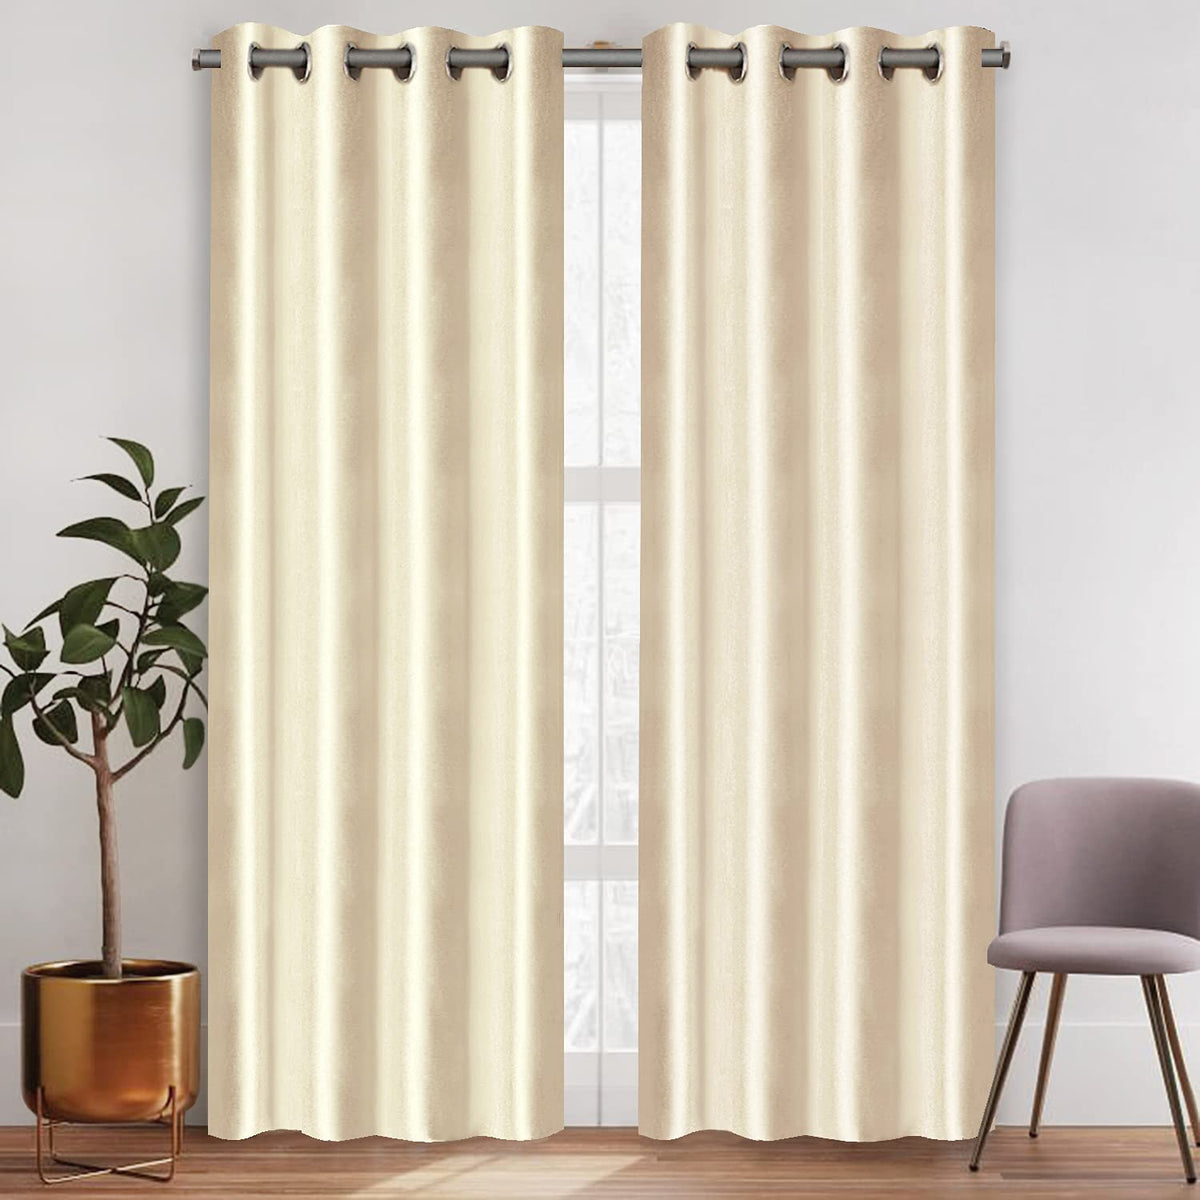 SmileSellers Polyester Solid Crushed Texture Curtain Door Screen